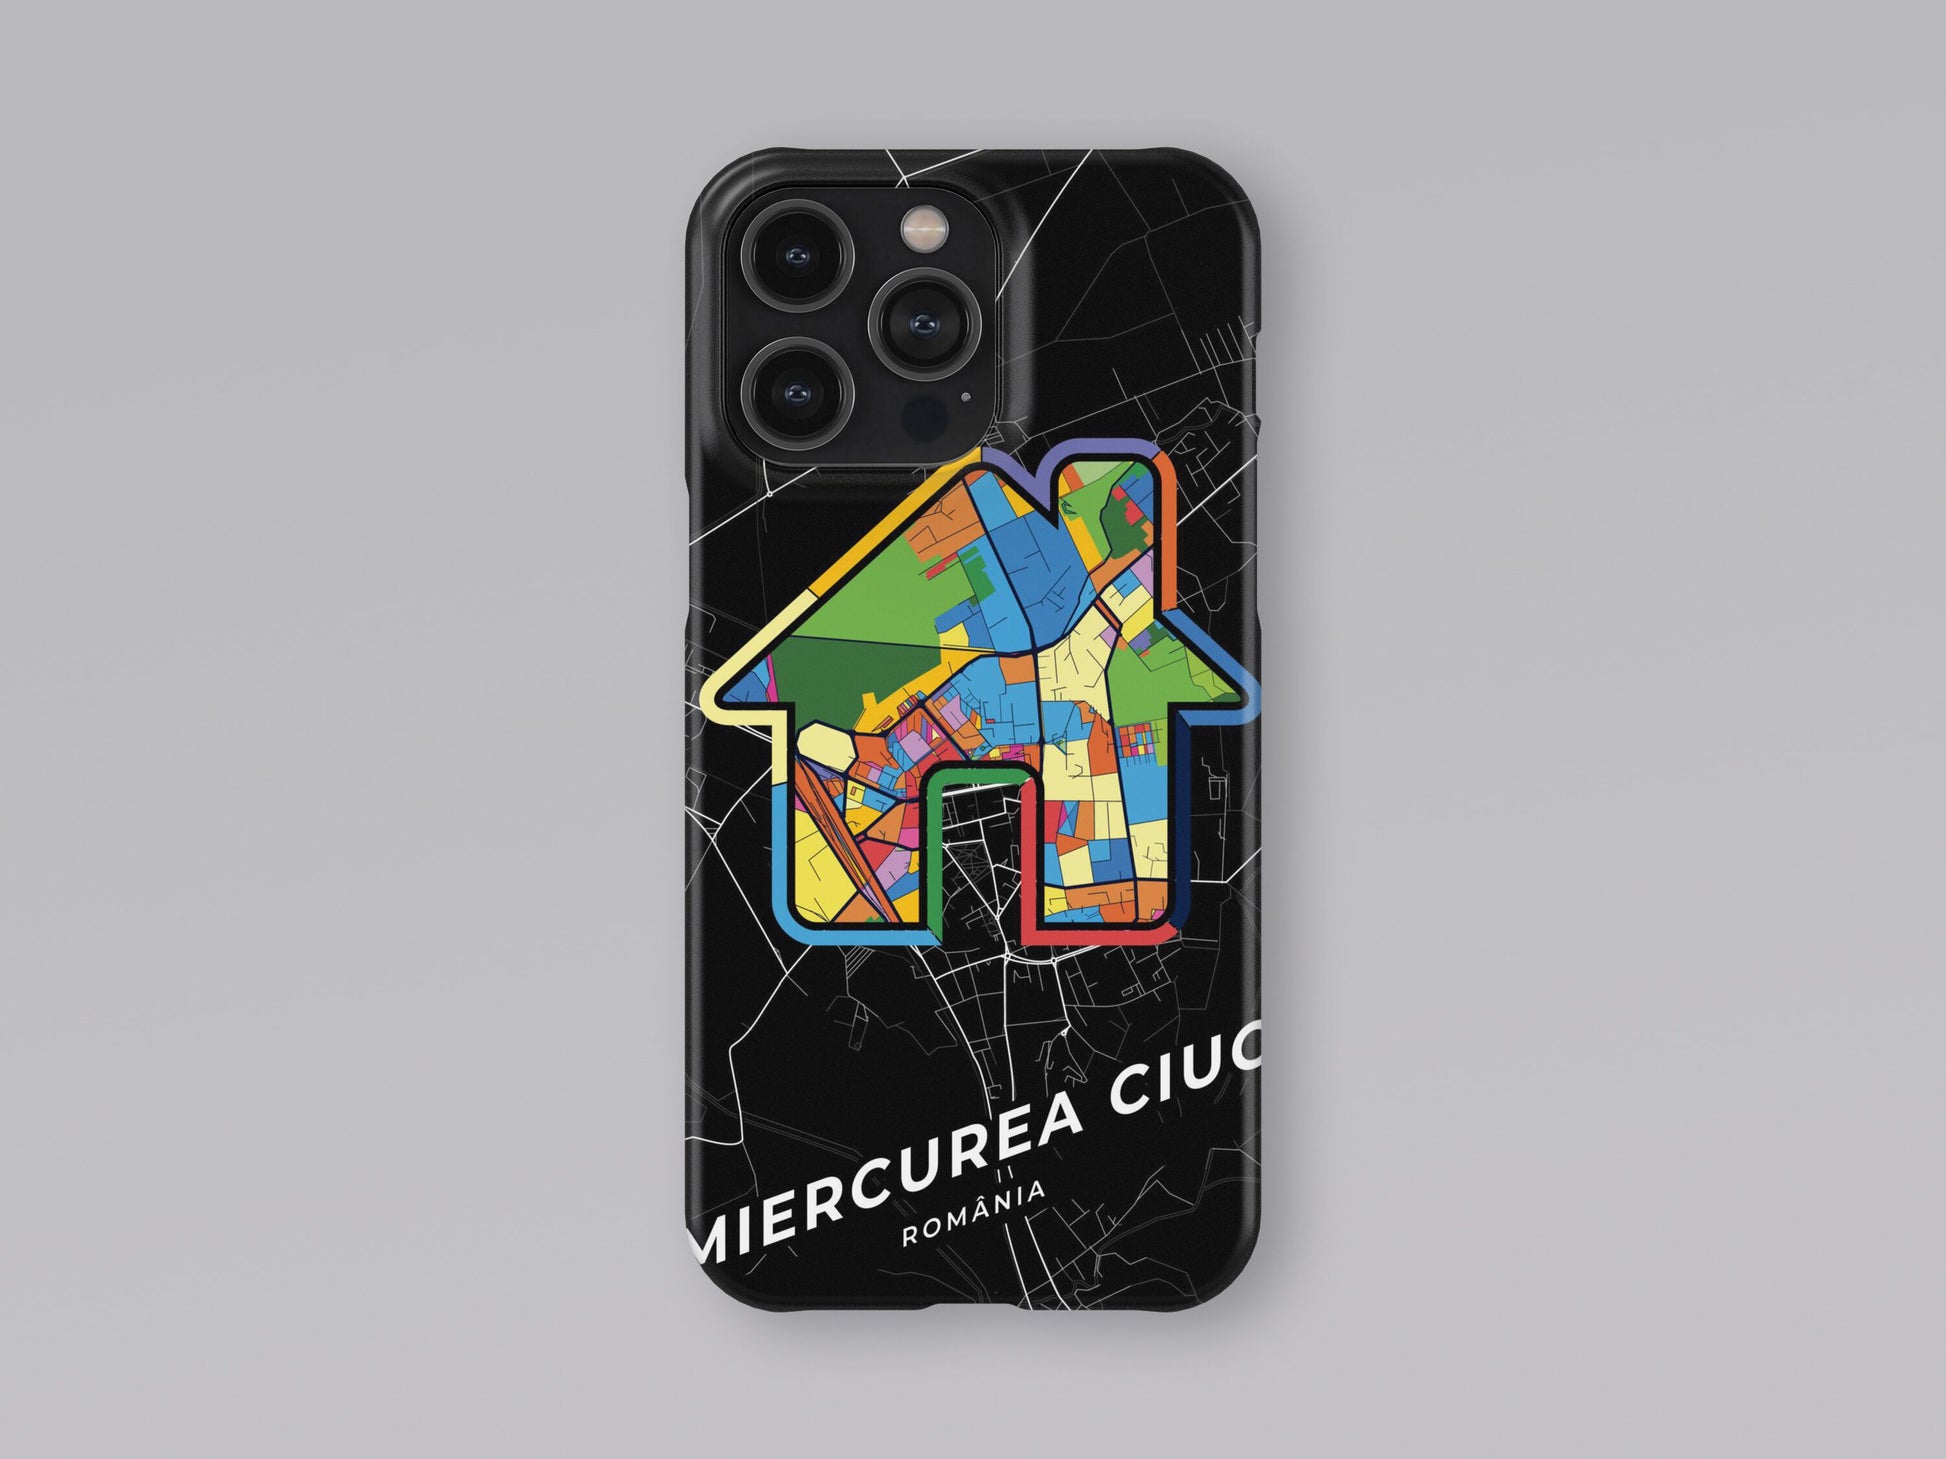 Miercurea Ciuc Romania slim phone case with colorful icon. Birthday, wedding or housewarming gift. Couple match cases. 3